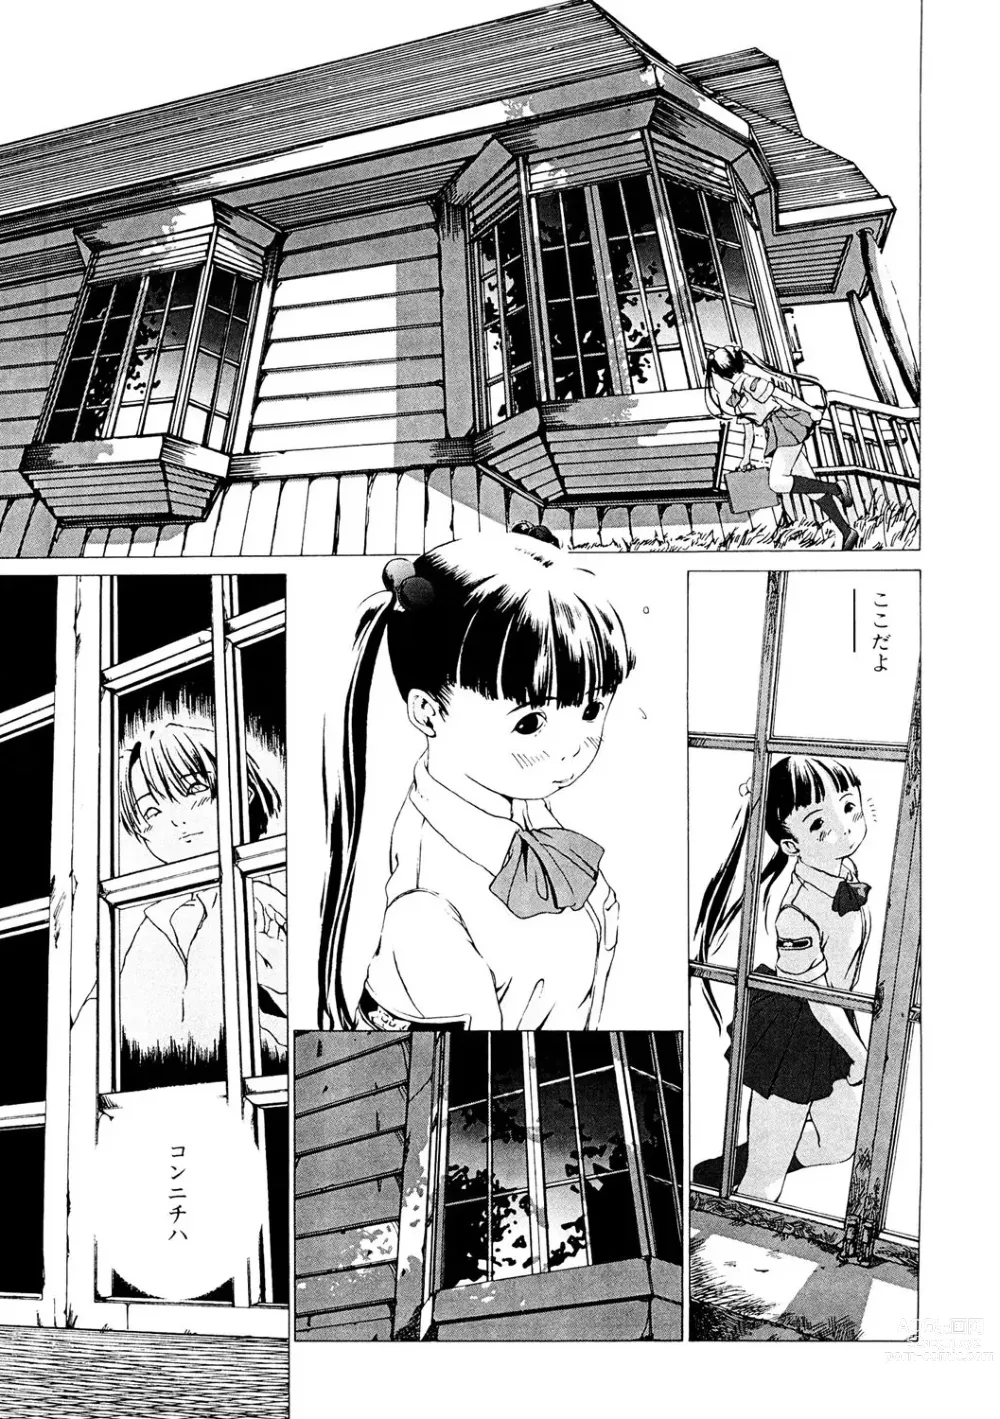 Page 160 of manga LQ -Little Queen- Vol. 53